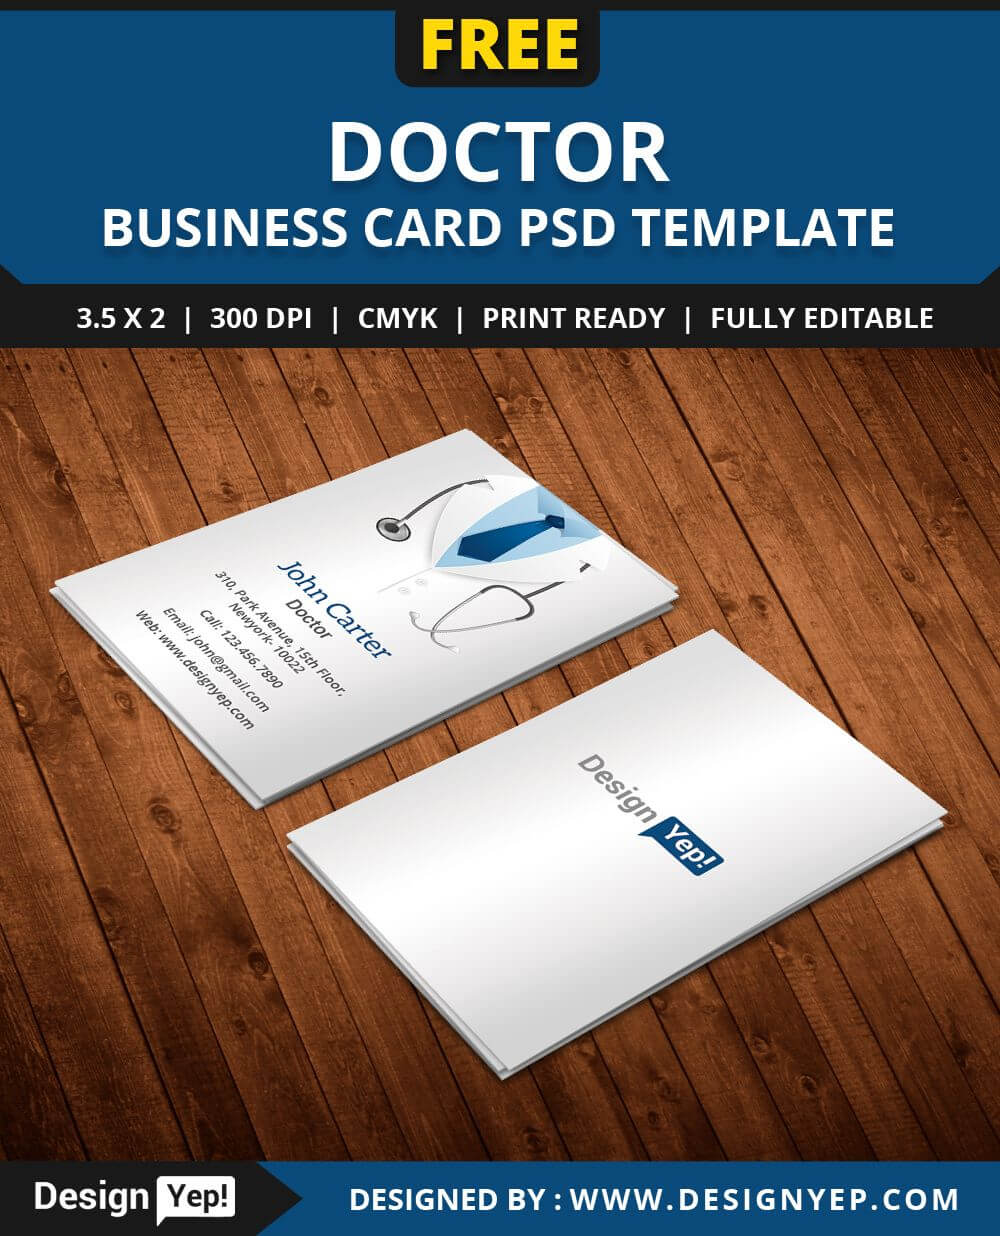 Free Doctor Business Card Template Psd | Business Card Psd Throughout Name Card Design Template Psd